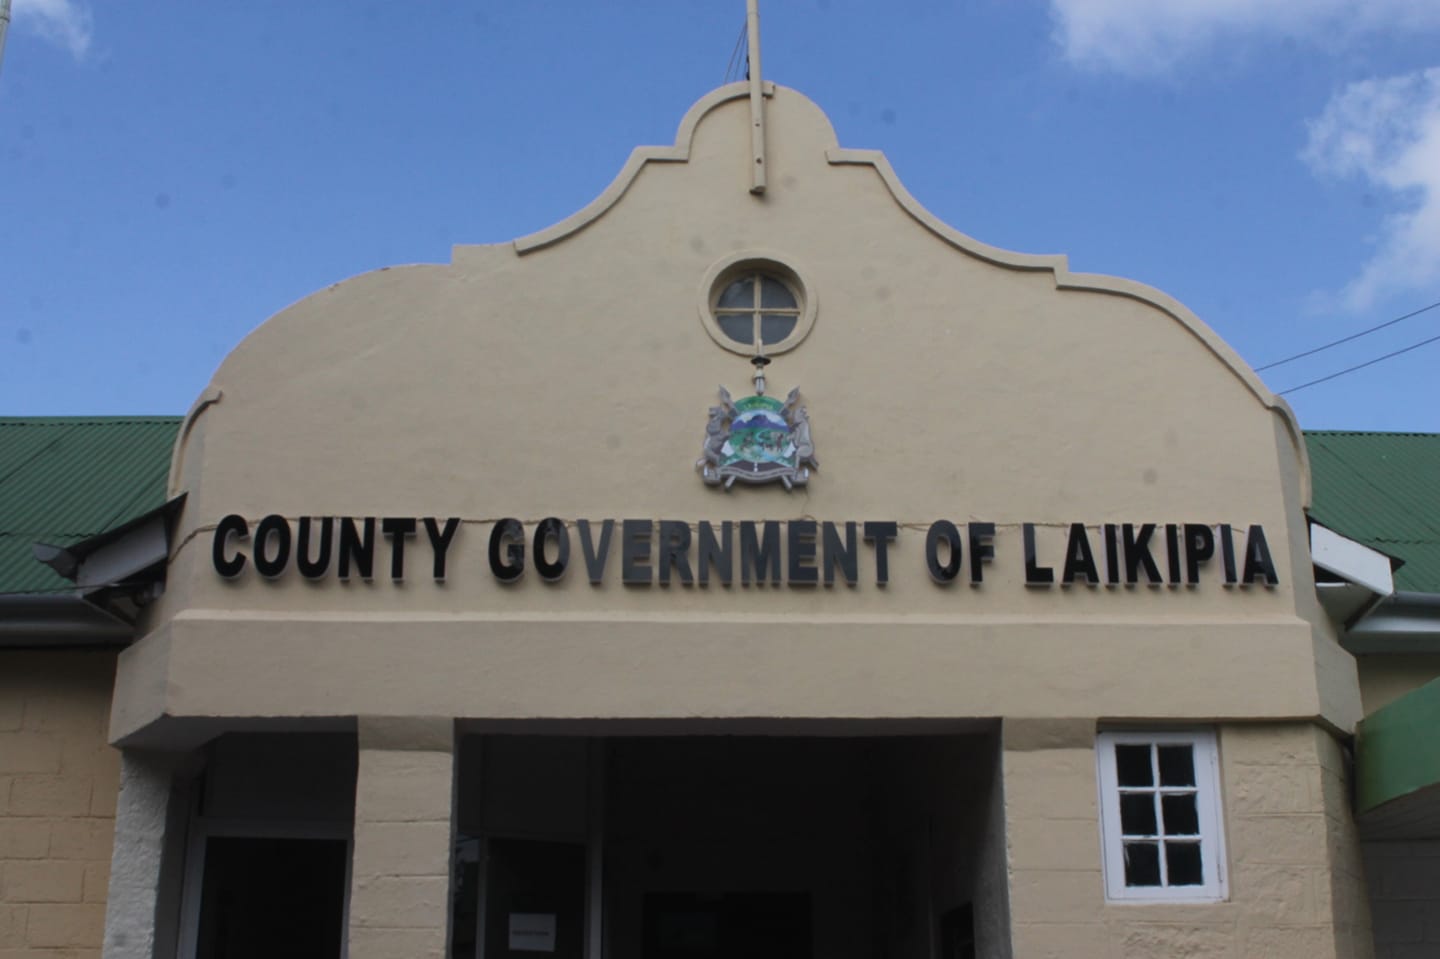 Laikipia County and Co-op Bank in a joint venture to fund over 7000 entrepreneurs through the Laikipia Enterprise Fund